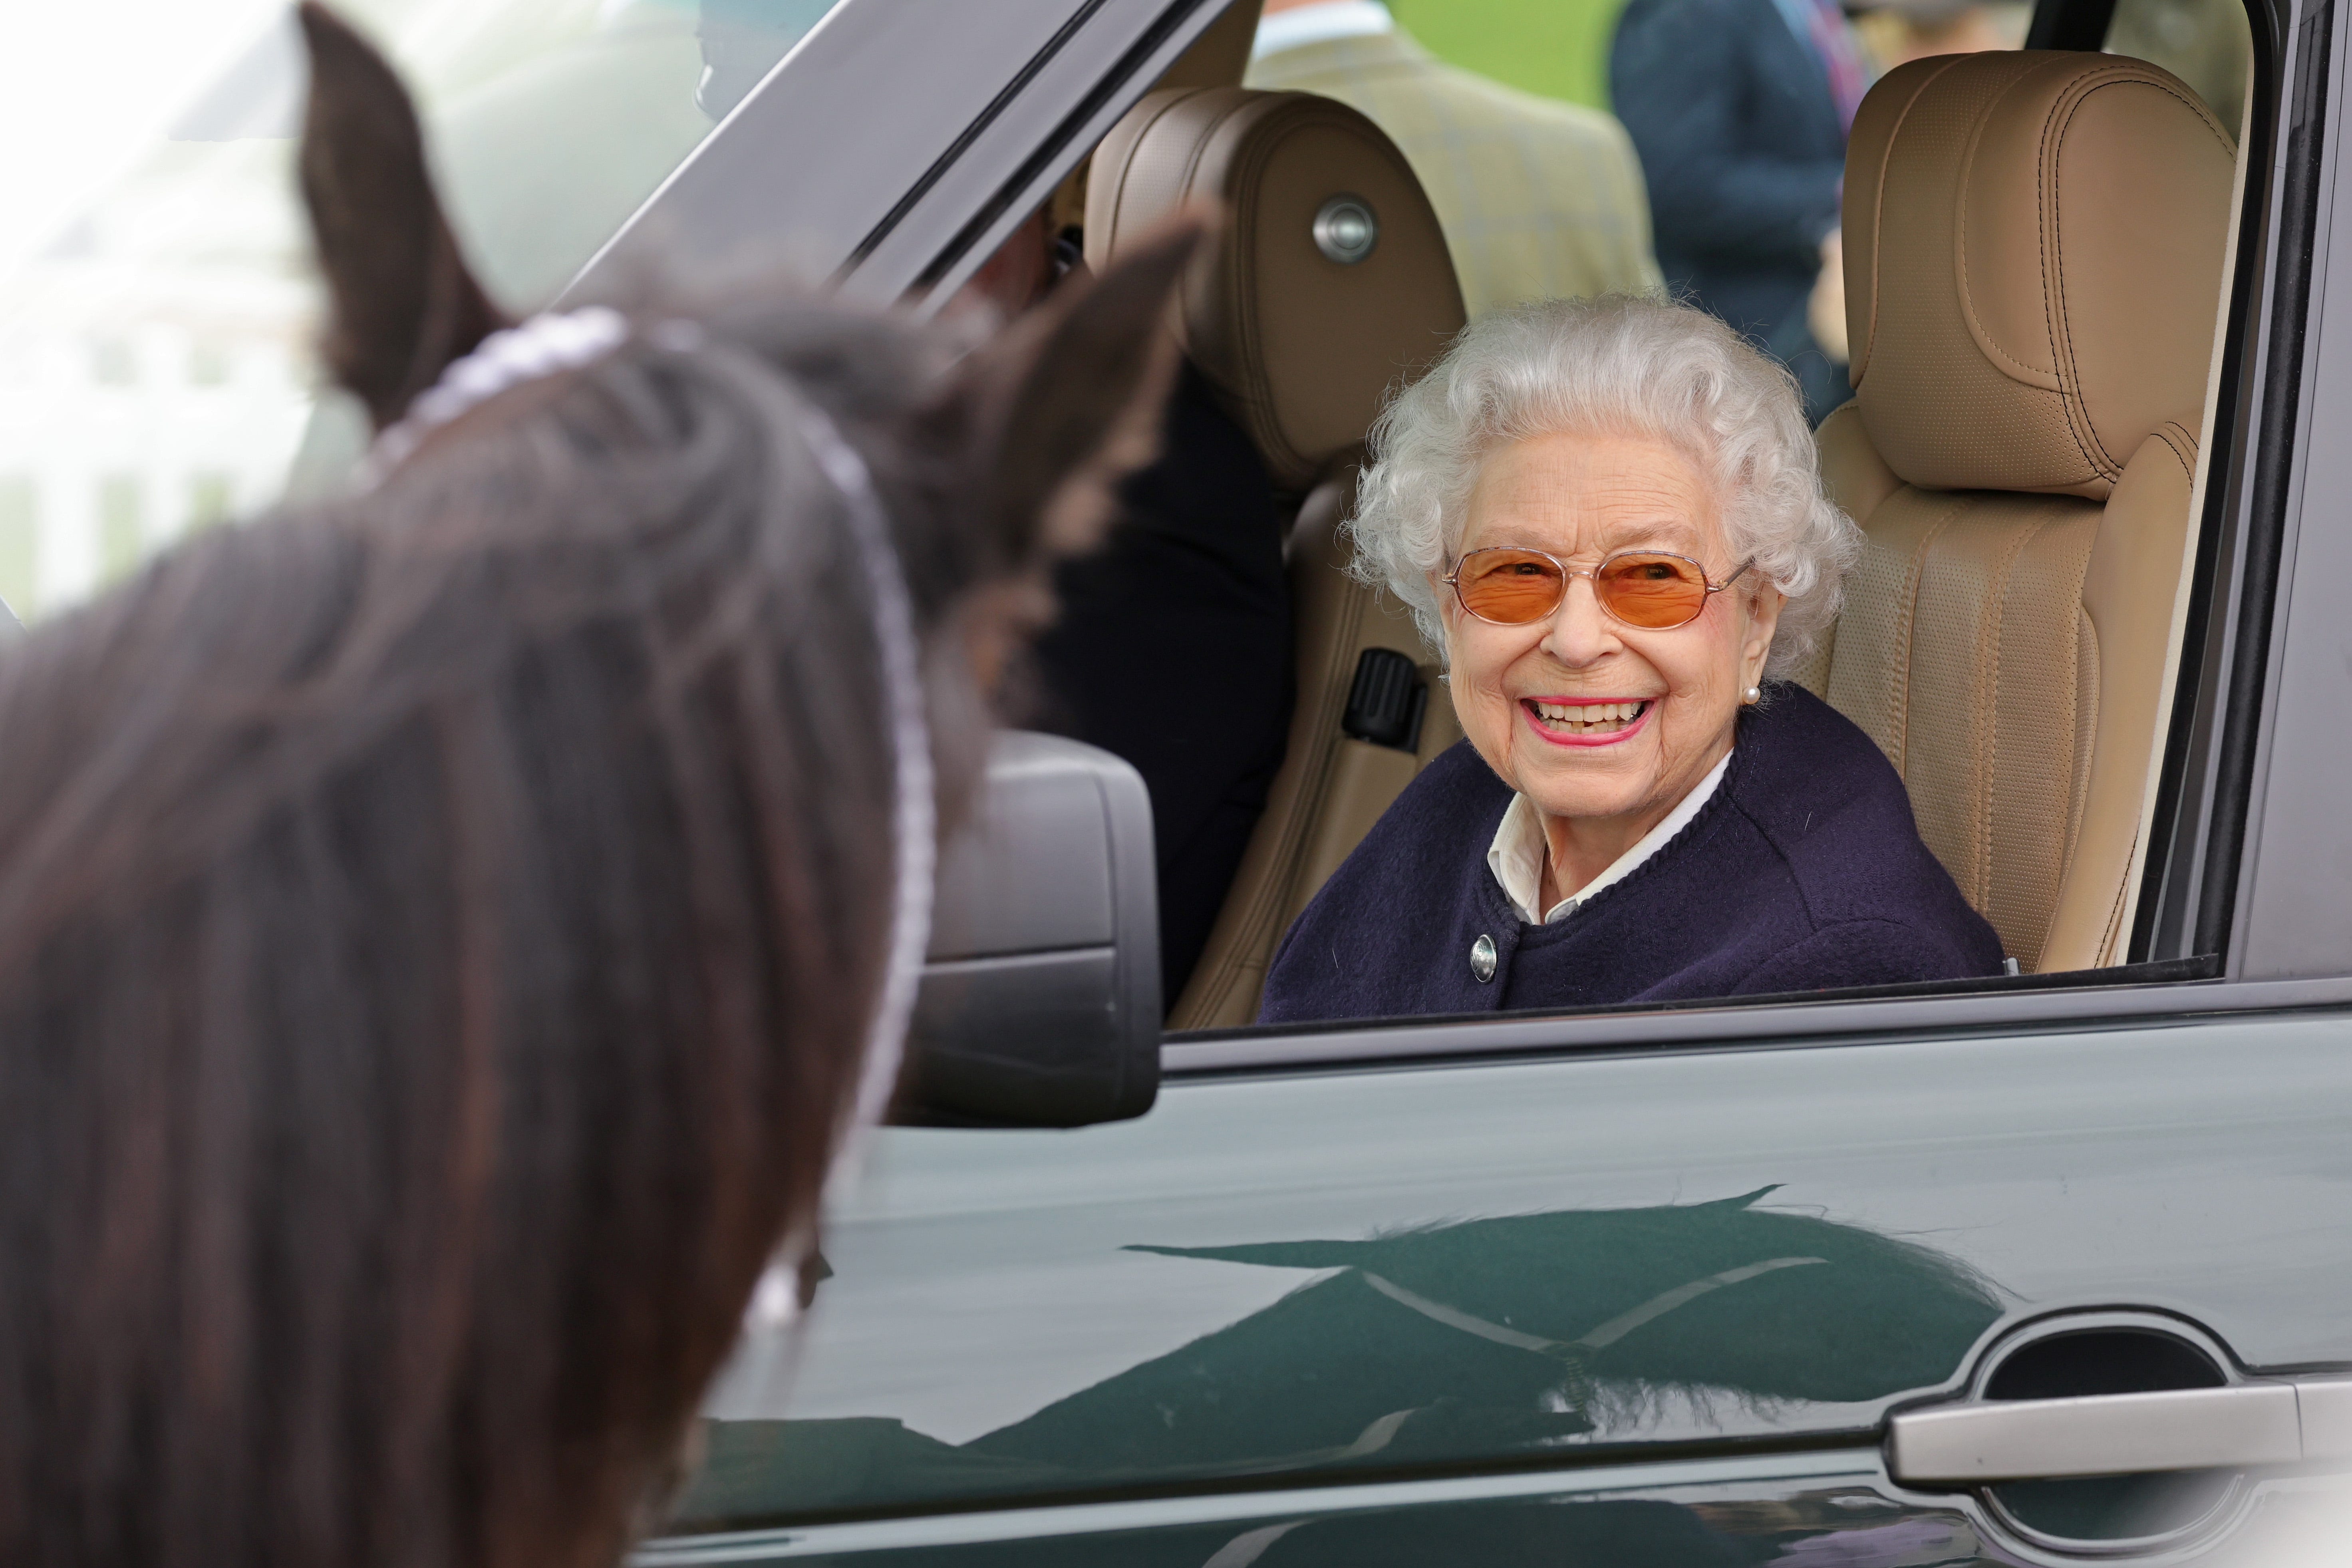 Queen elizabeth ii smiles brightly at horse show, her first public appearance in weeks